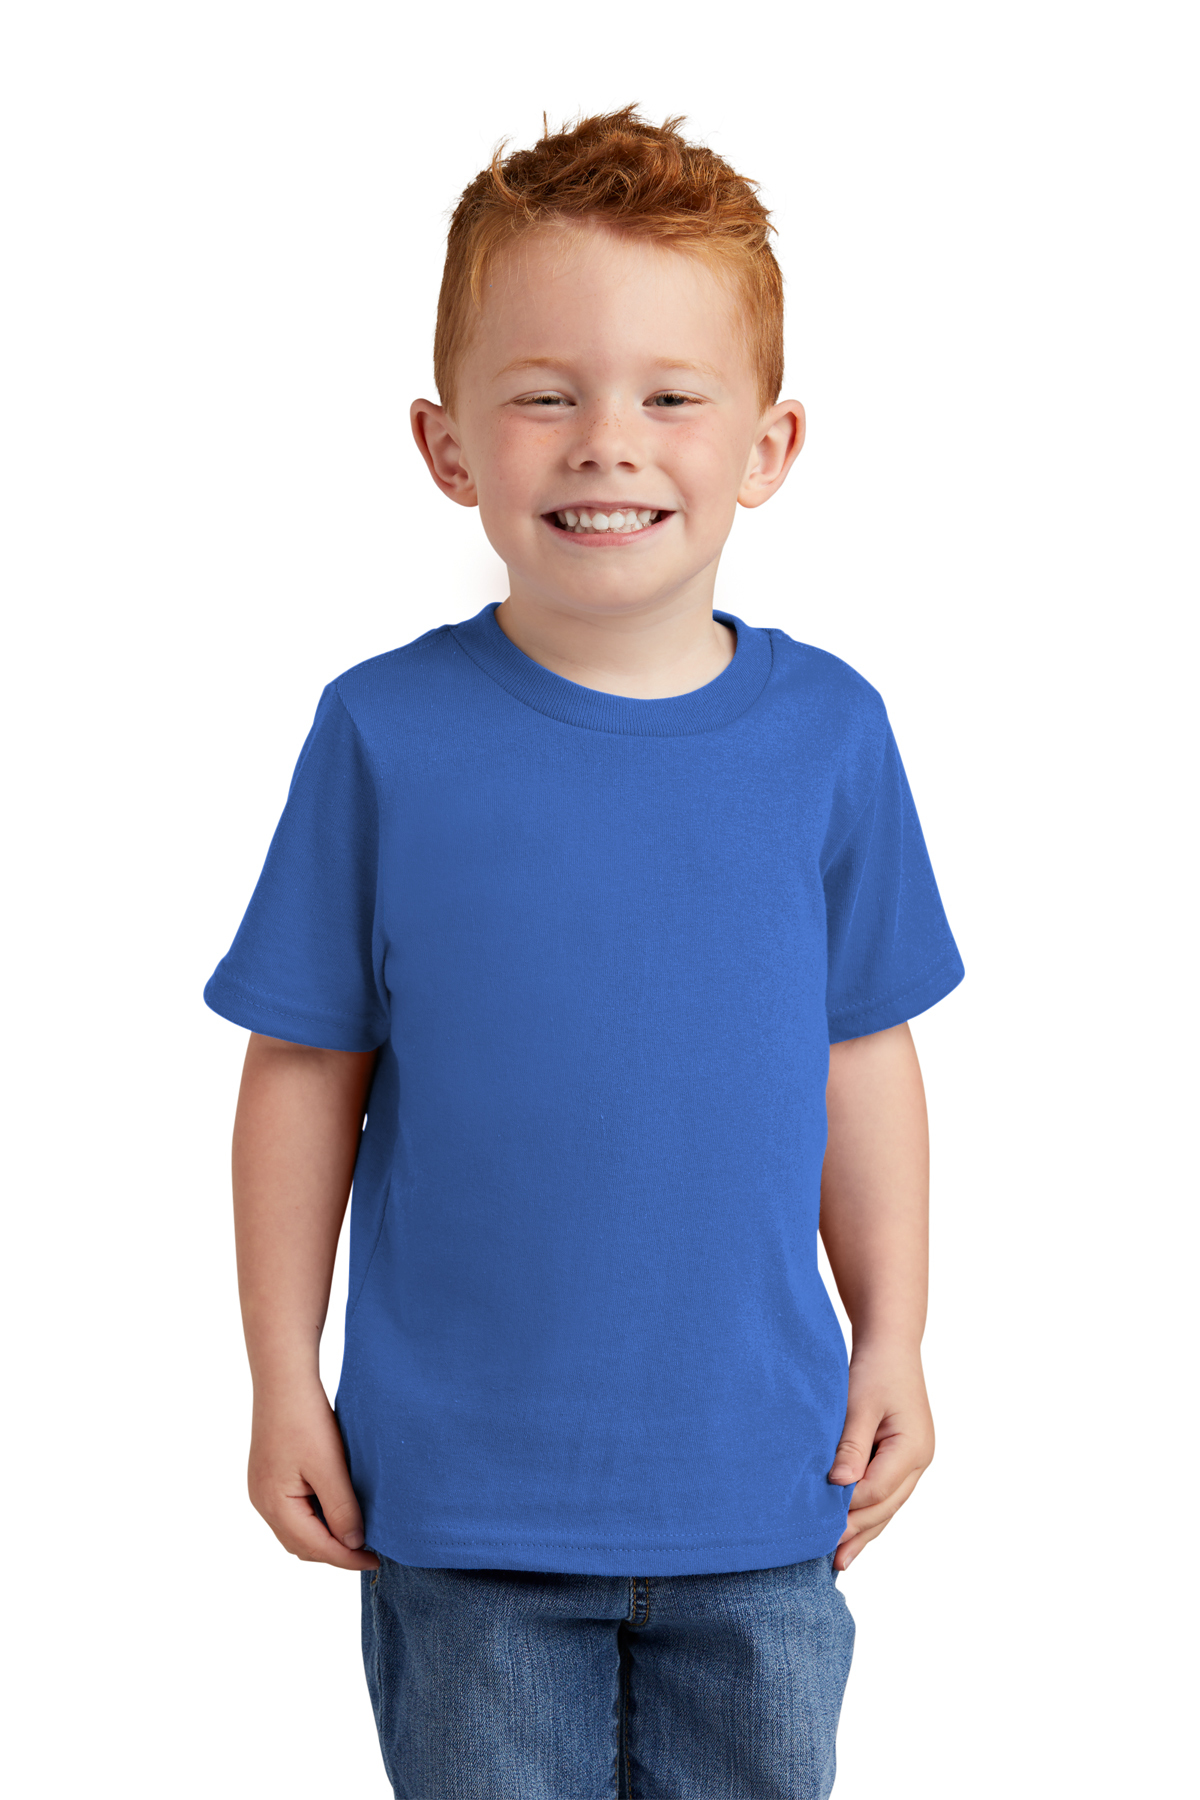 Port & Company Toddler Core Cotton Tee | Product | SanMar